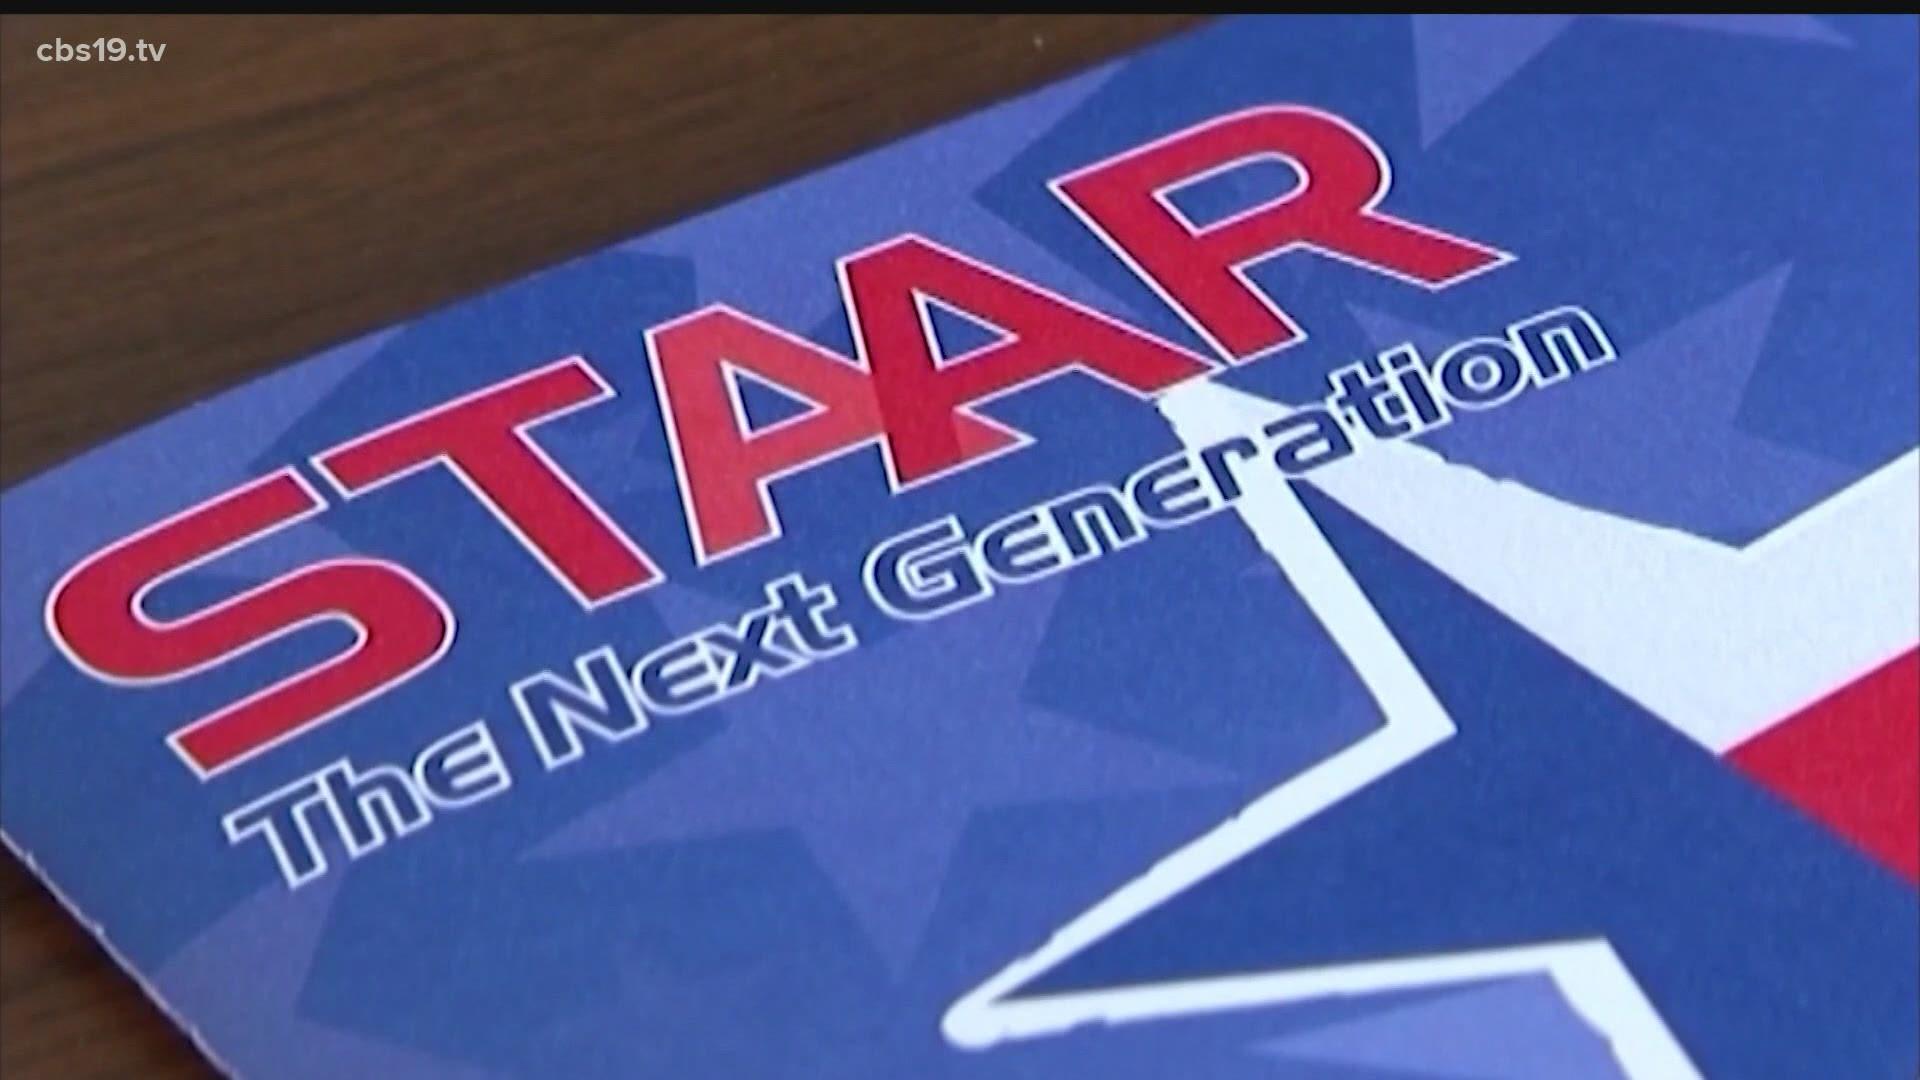 The TEA released STAAR testing scores for grades 3 through 8 on Monday. The scores were lower in nearly every category compared to 2019.